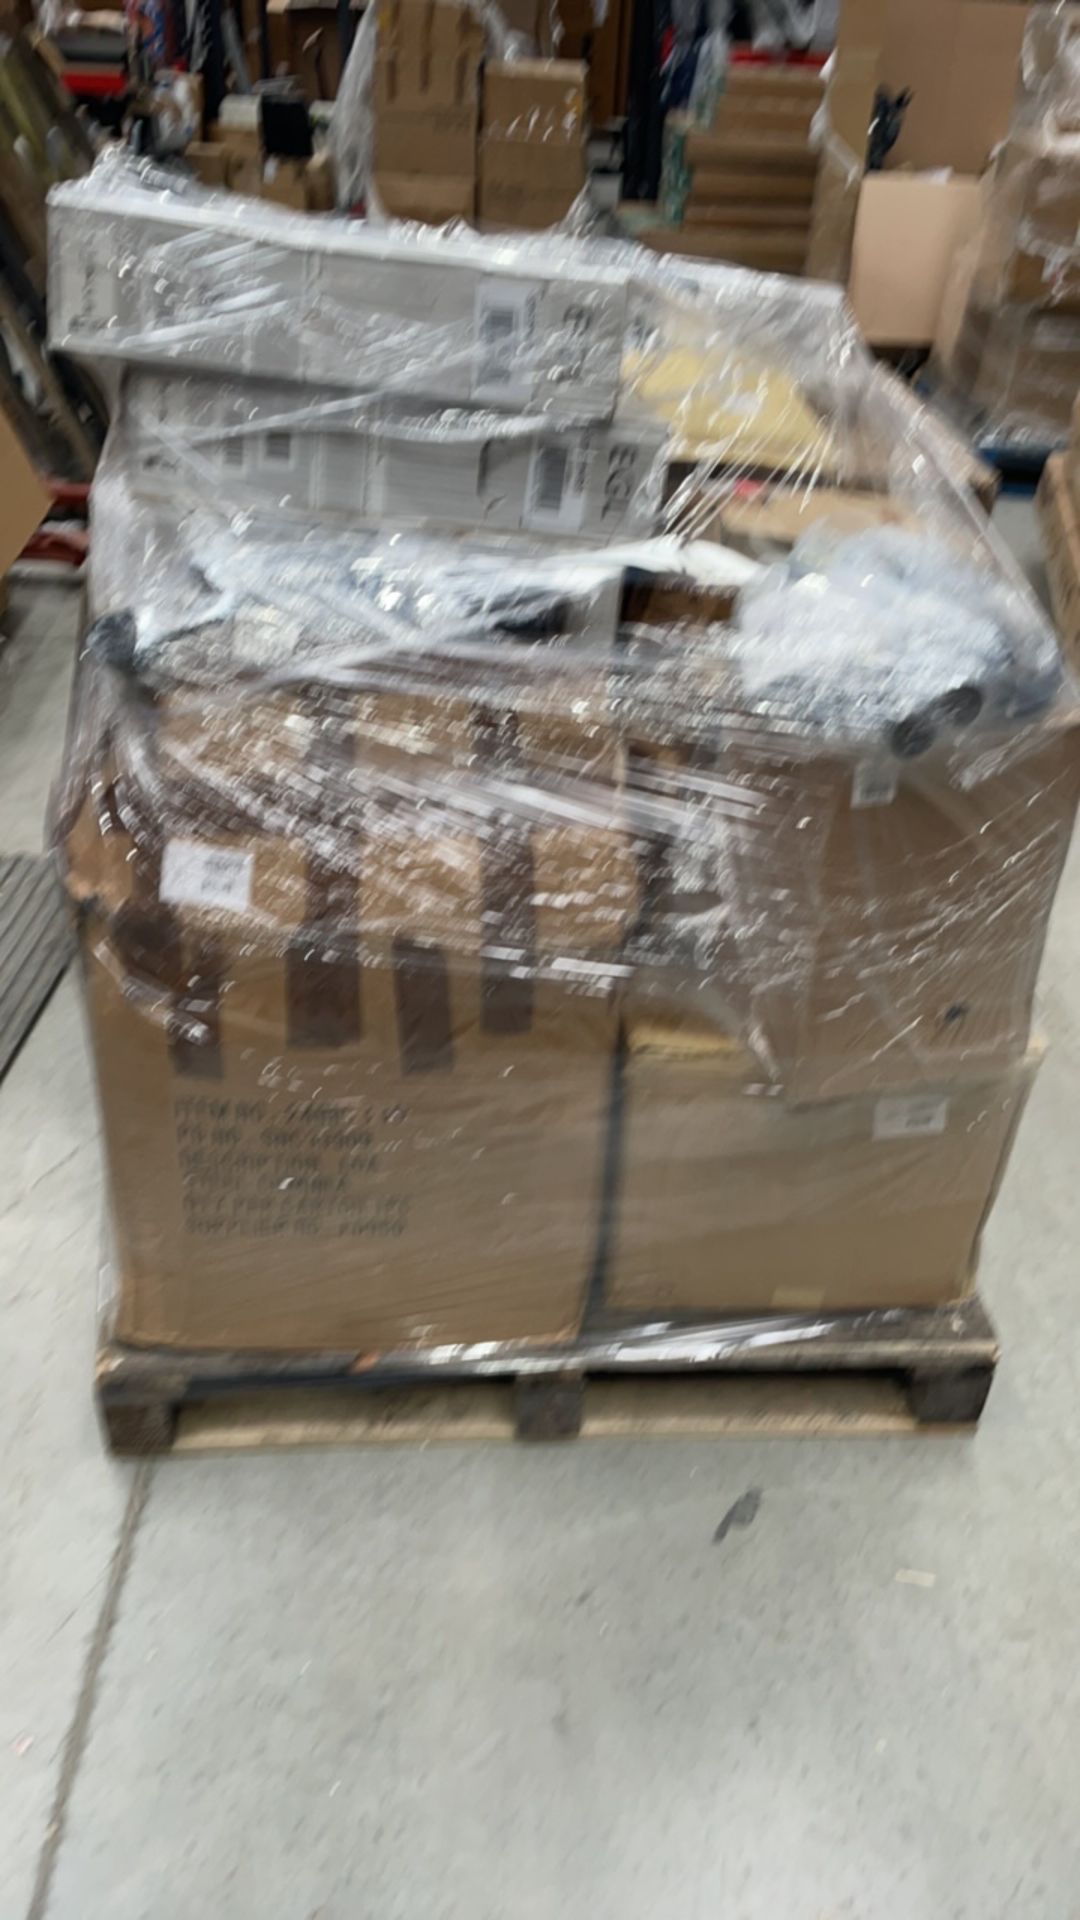 Mixed Retail Returns Pallet - Image 2 of 3